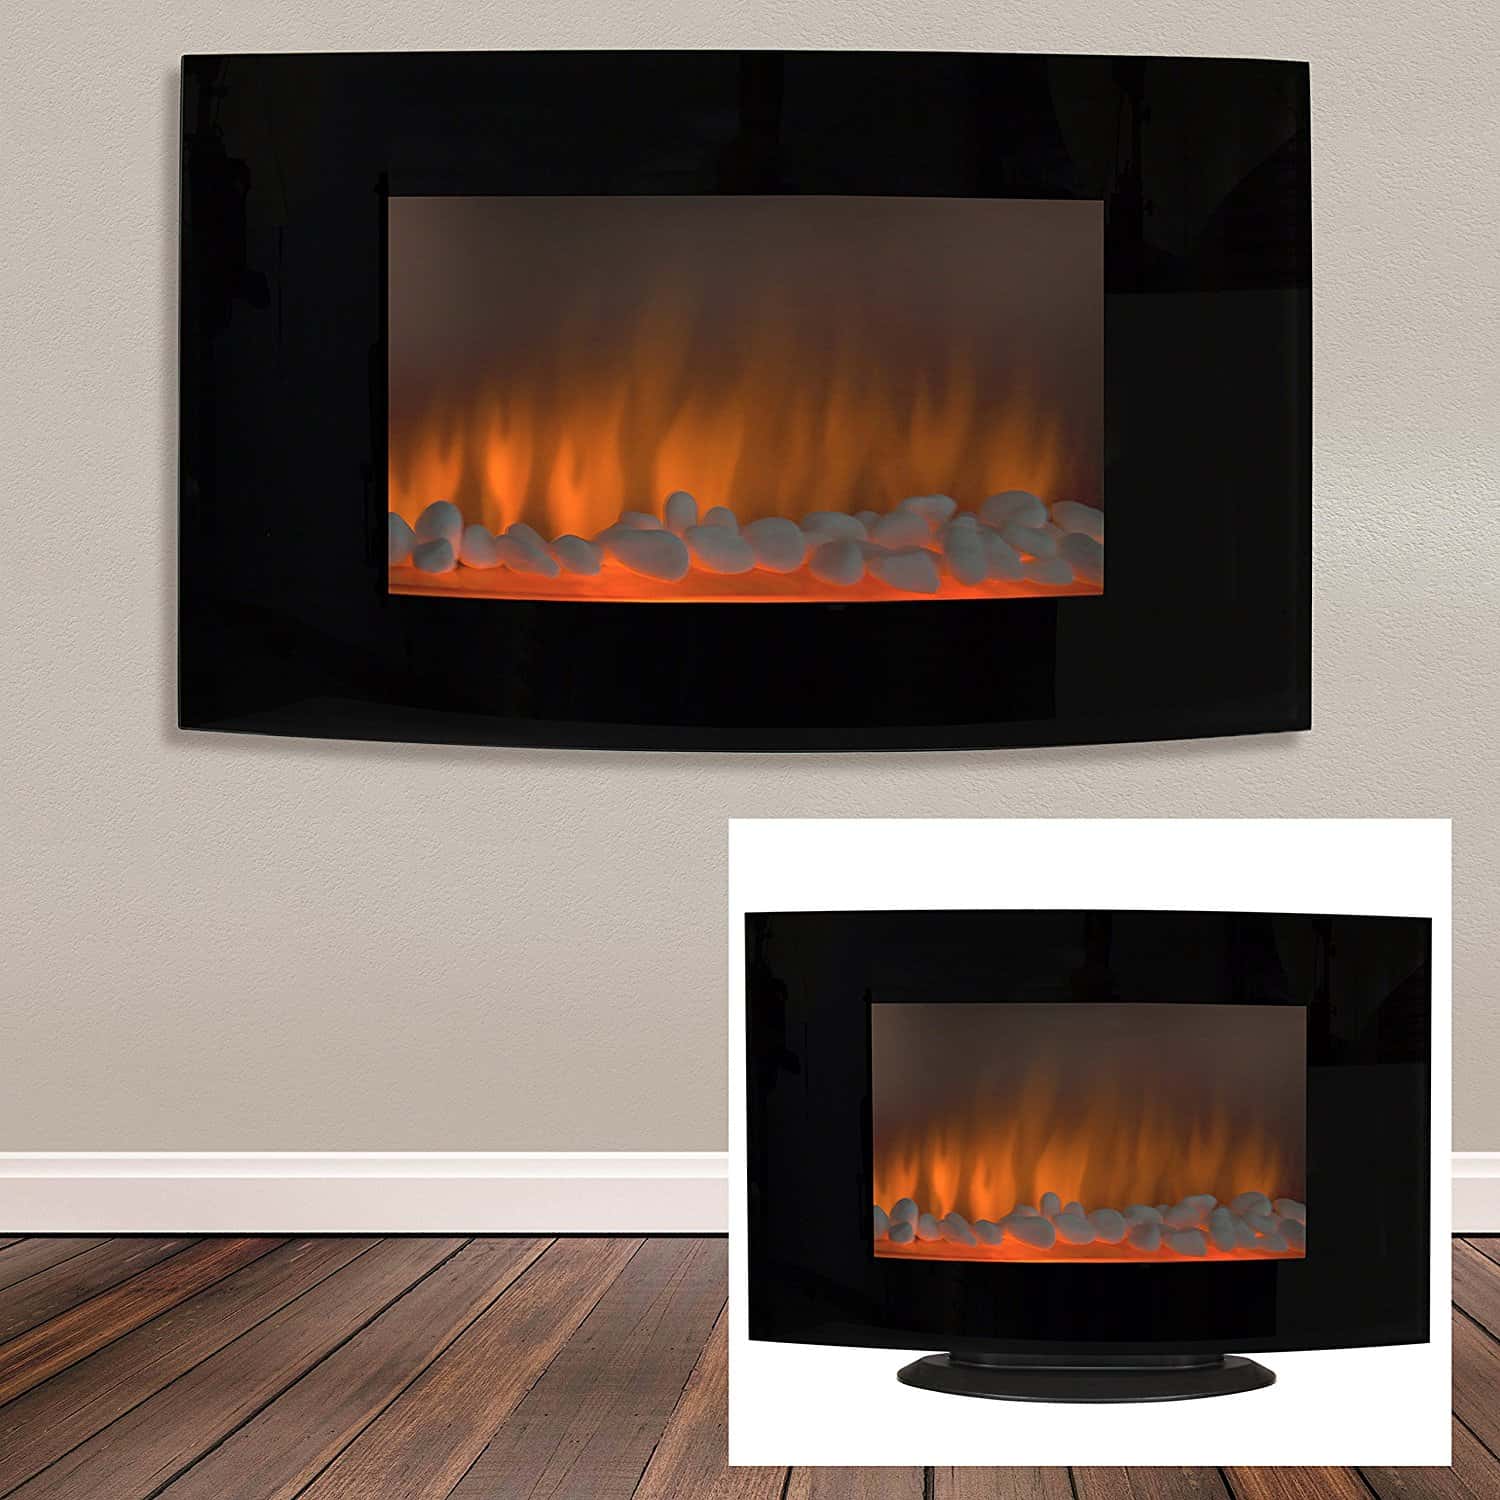 Large 1500W Heat Adjustable Electric Wall Mount & Free Standing Fireplace Heater with Glass XL